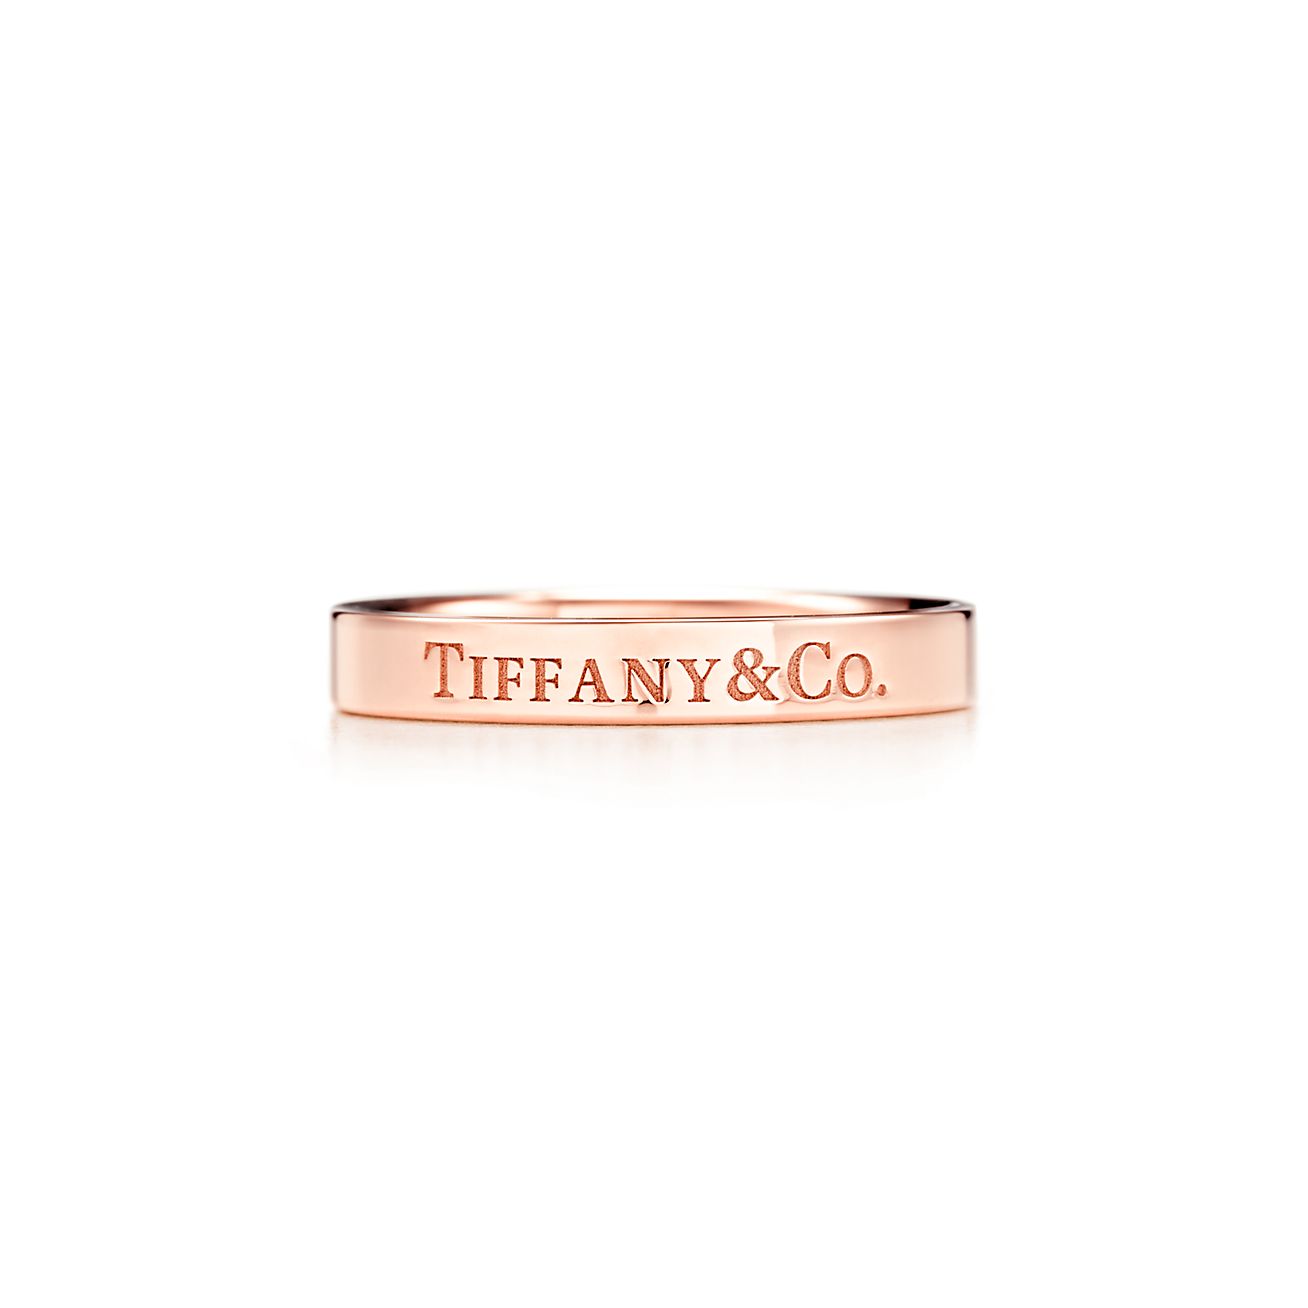 Co.® band ring in 18k rose gold 